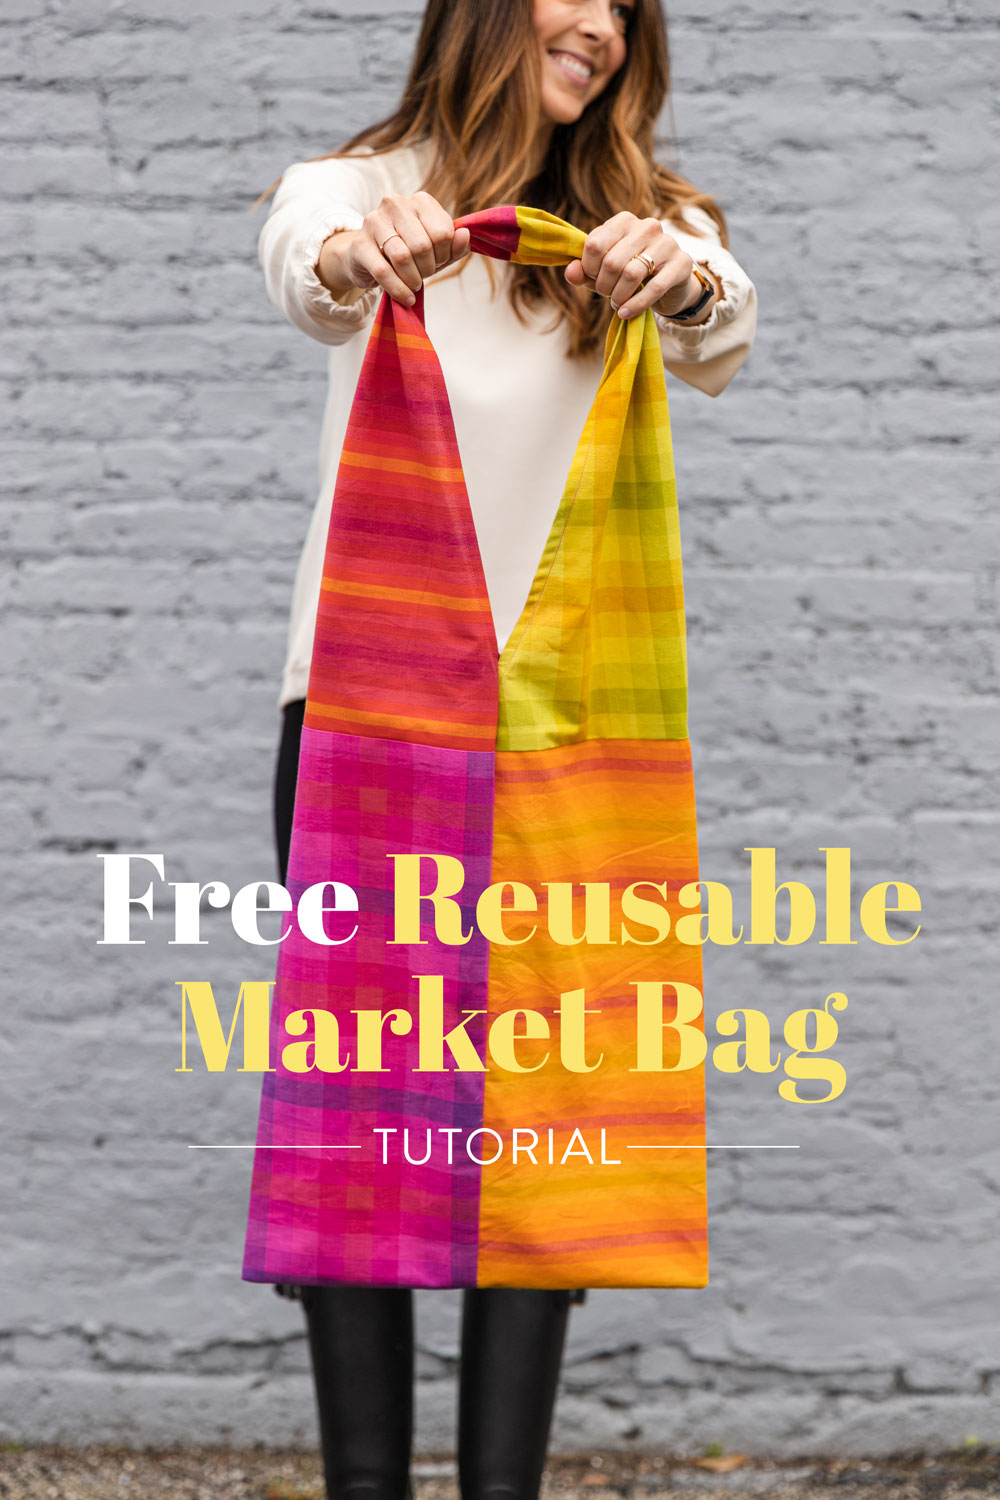 In this free reusable market bag tutorial you only need basic sewing skills and 4 fat quarters of fabric. This sewing DIY is great for kids too! suzyquilts.com #freebagpattern #beginnersewing #patchworkbag